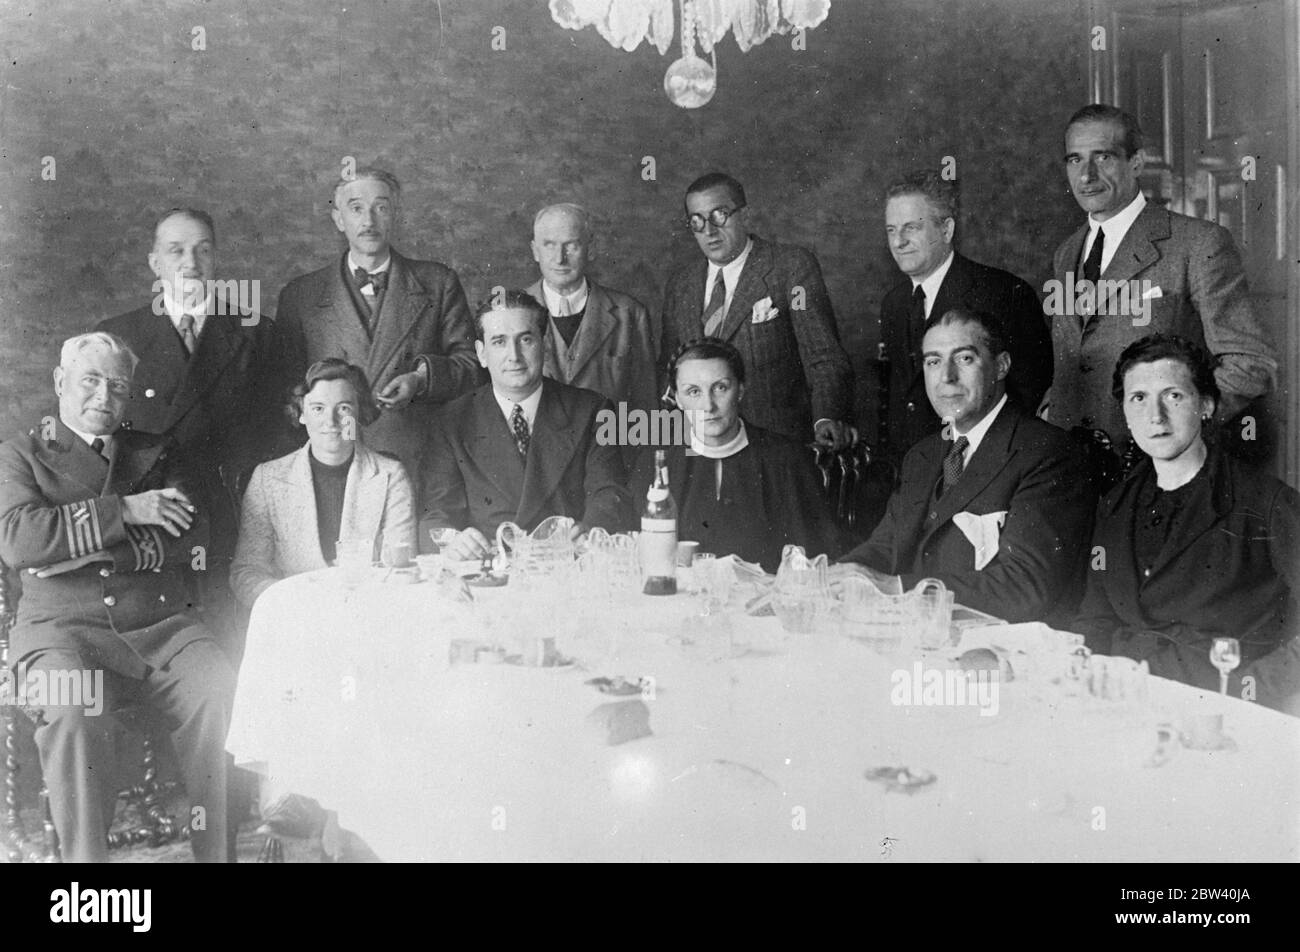 Captain of British foodship and his daughter feted after running Bilbao blockade. Captain W. H. Roberts of Penarth, who ran his British foodship Seven Seas Spray through the insurgent blockade of Bilbao was guest of honour at a special luncheon given in Durango, near Bilbao by Don R. M. Aldasoro, the Councillor of Commerce and Supplies. Also at the luncheon was the skipper's 20-year-old daughter Miss Fifi Roberts. She described the blockade as all my eye and Betty Martin [phrase meaning nonsense]. It is as easy as rolling off a log. Photo shows: to right (seated) - captain W. H. Roberts, Miss Stock Photo